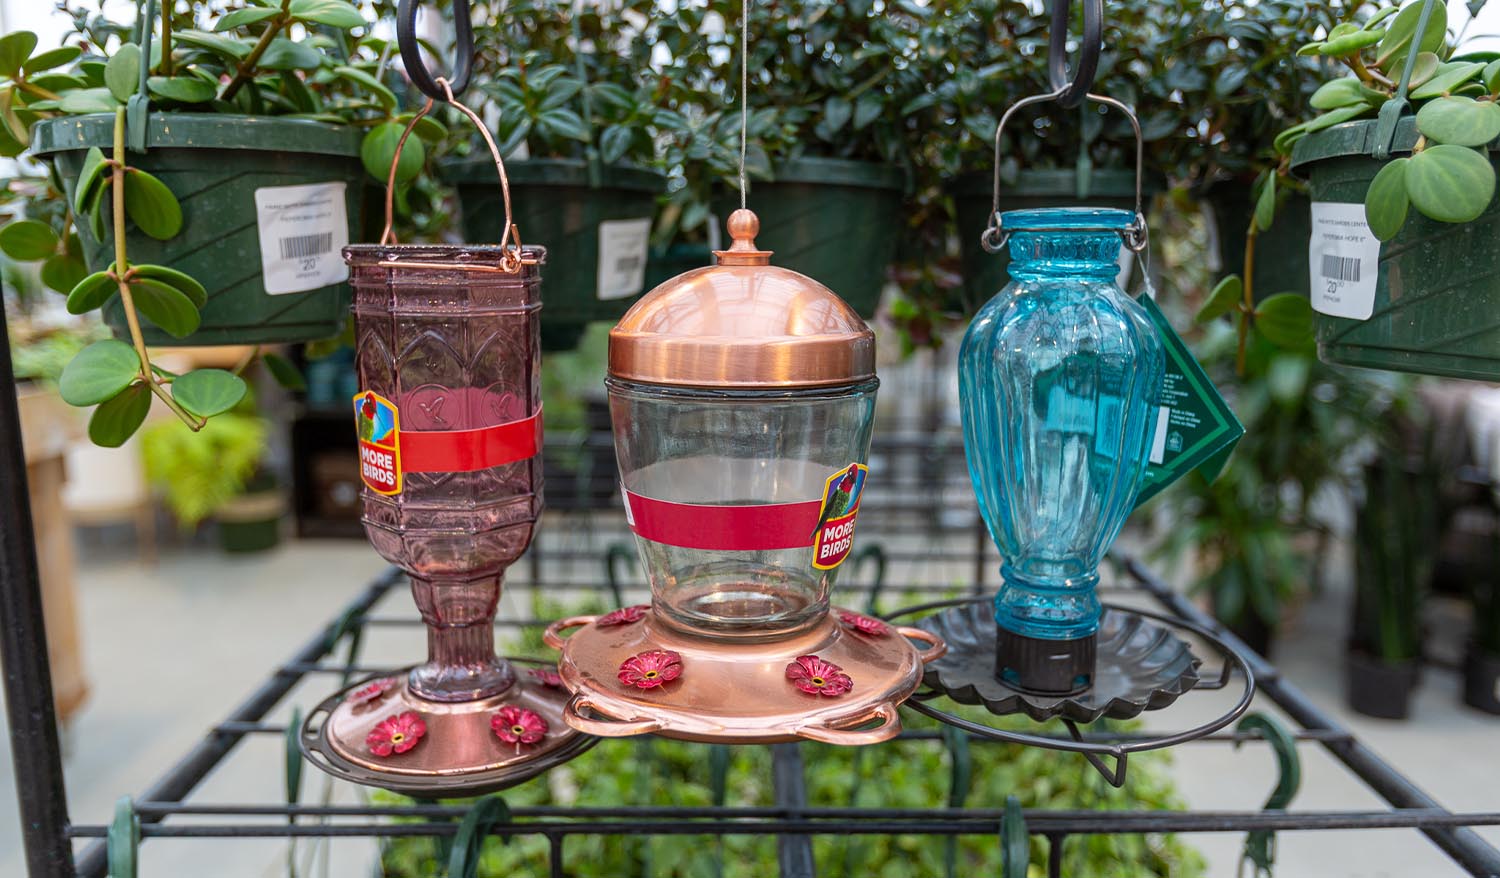 Three colorful bird feeders hanging from a bar